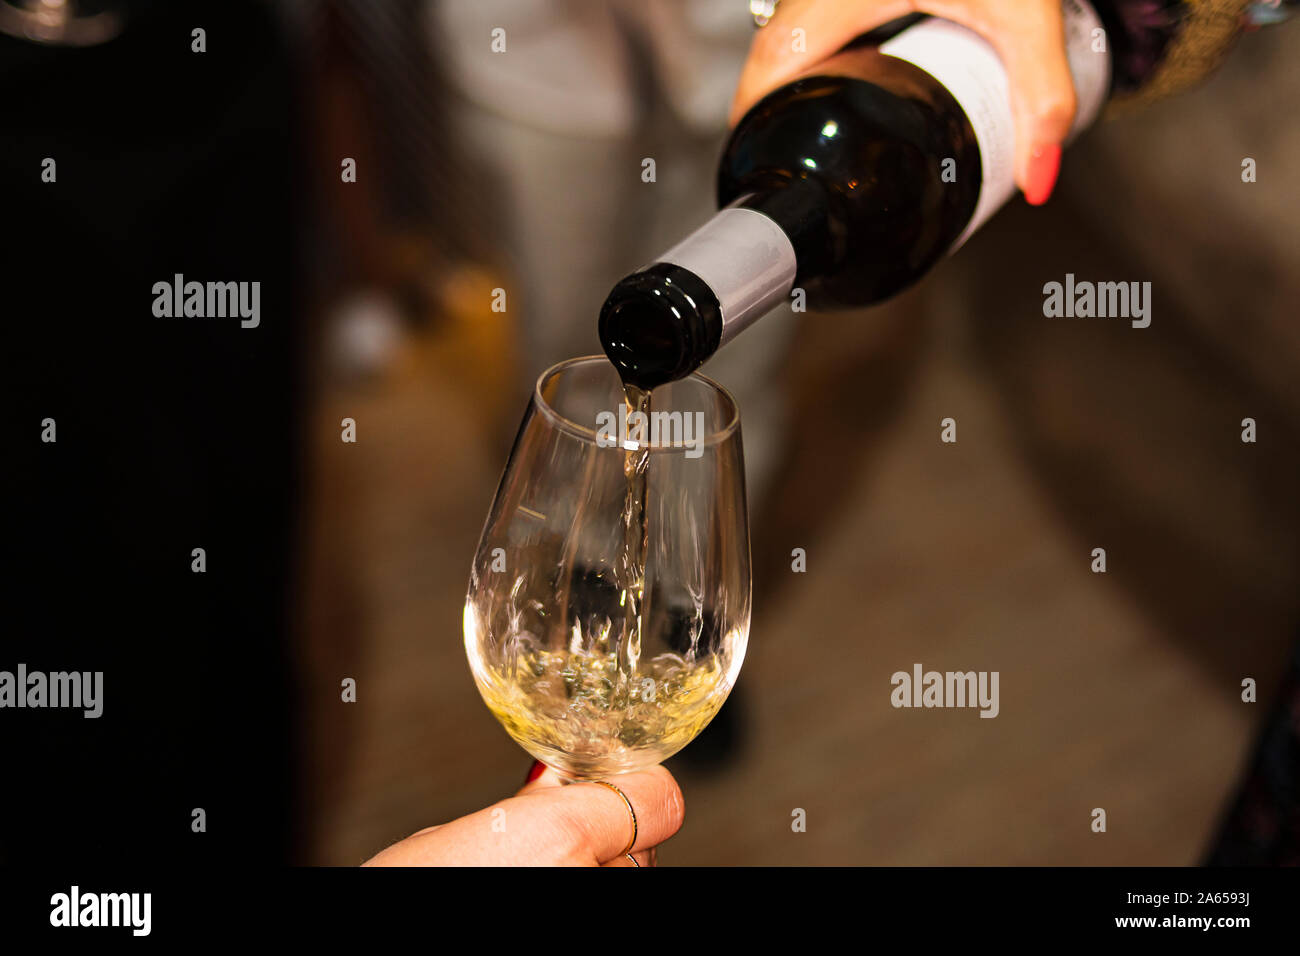 Person serving a glass of wine in glass cup in a dark cellar Stock Photo